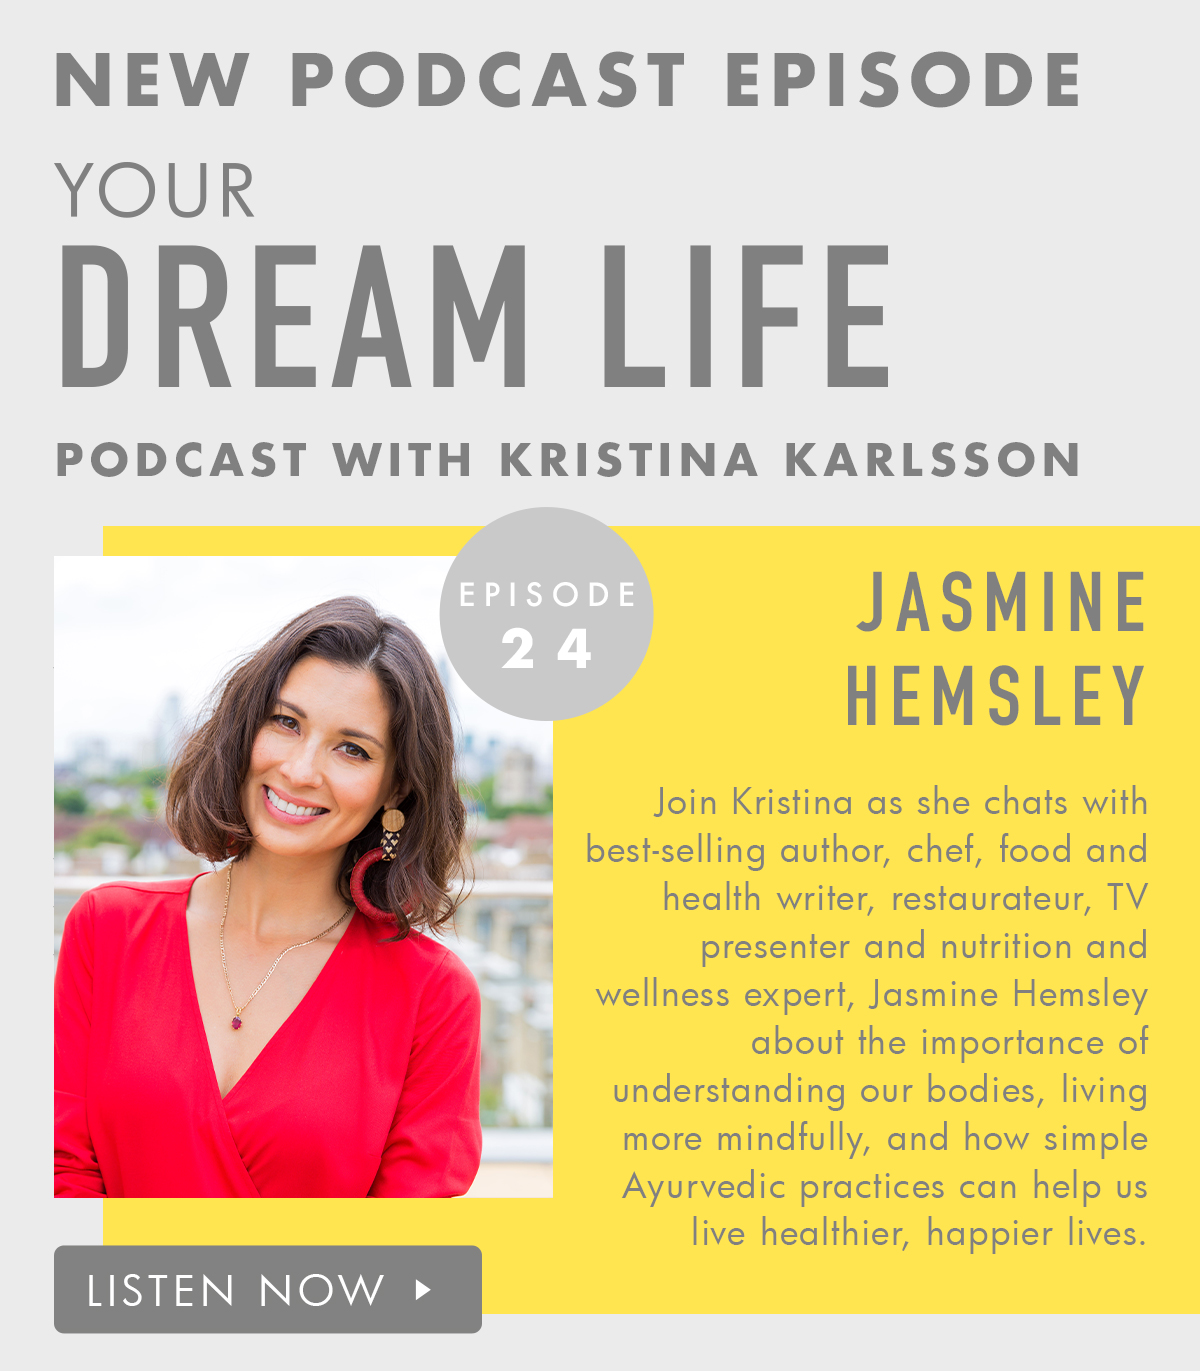 New Episode Your Dream Life Podcast! Listen now. 